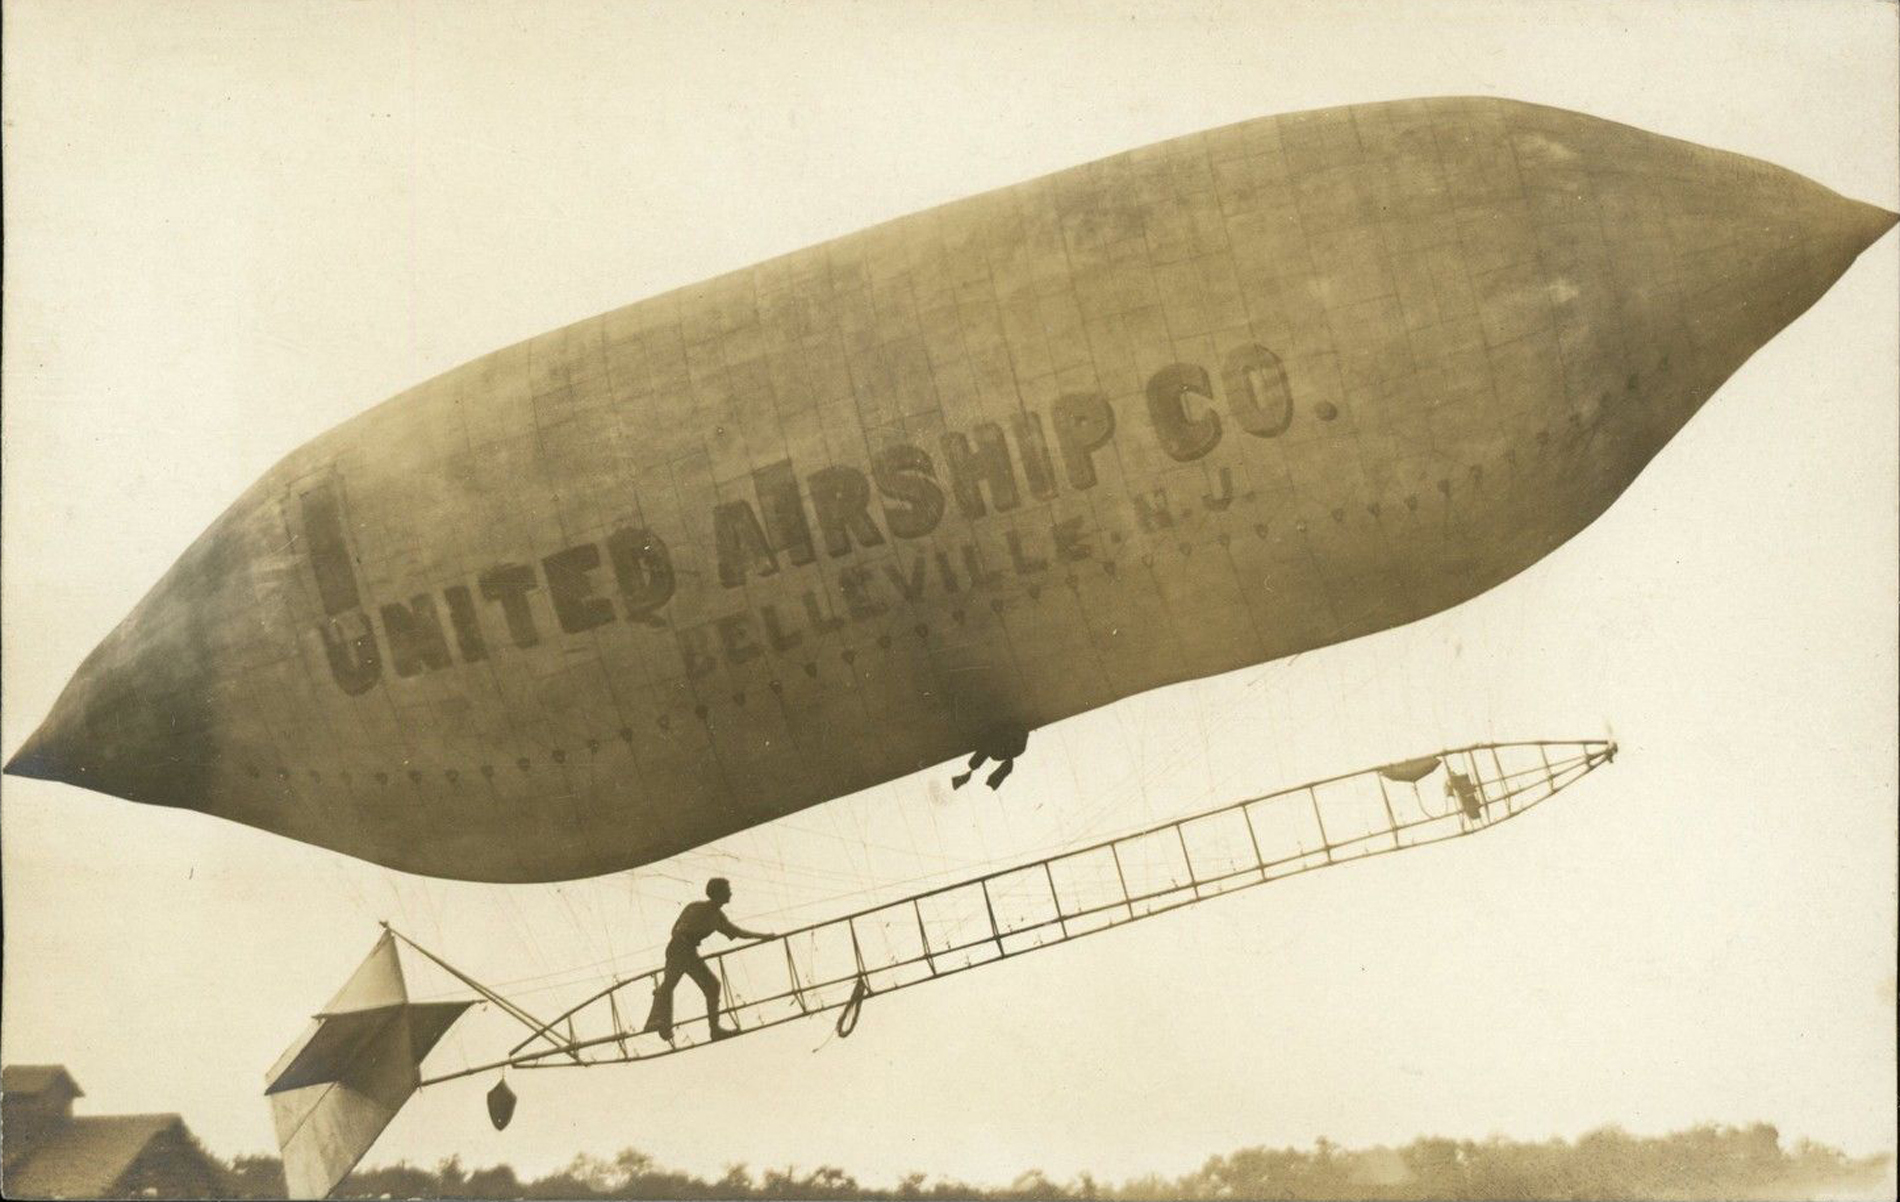 Atlantic City - A product of the United Airship company of Bellville NJ